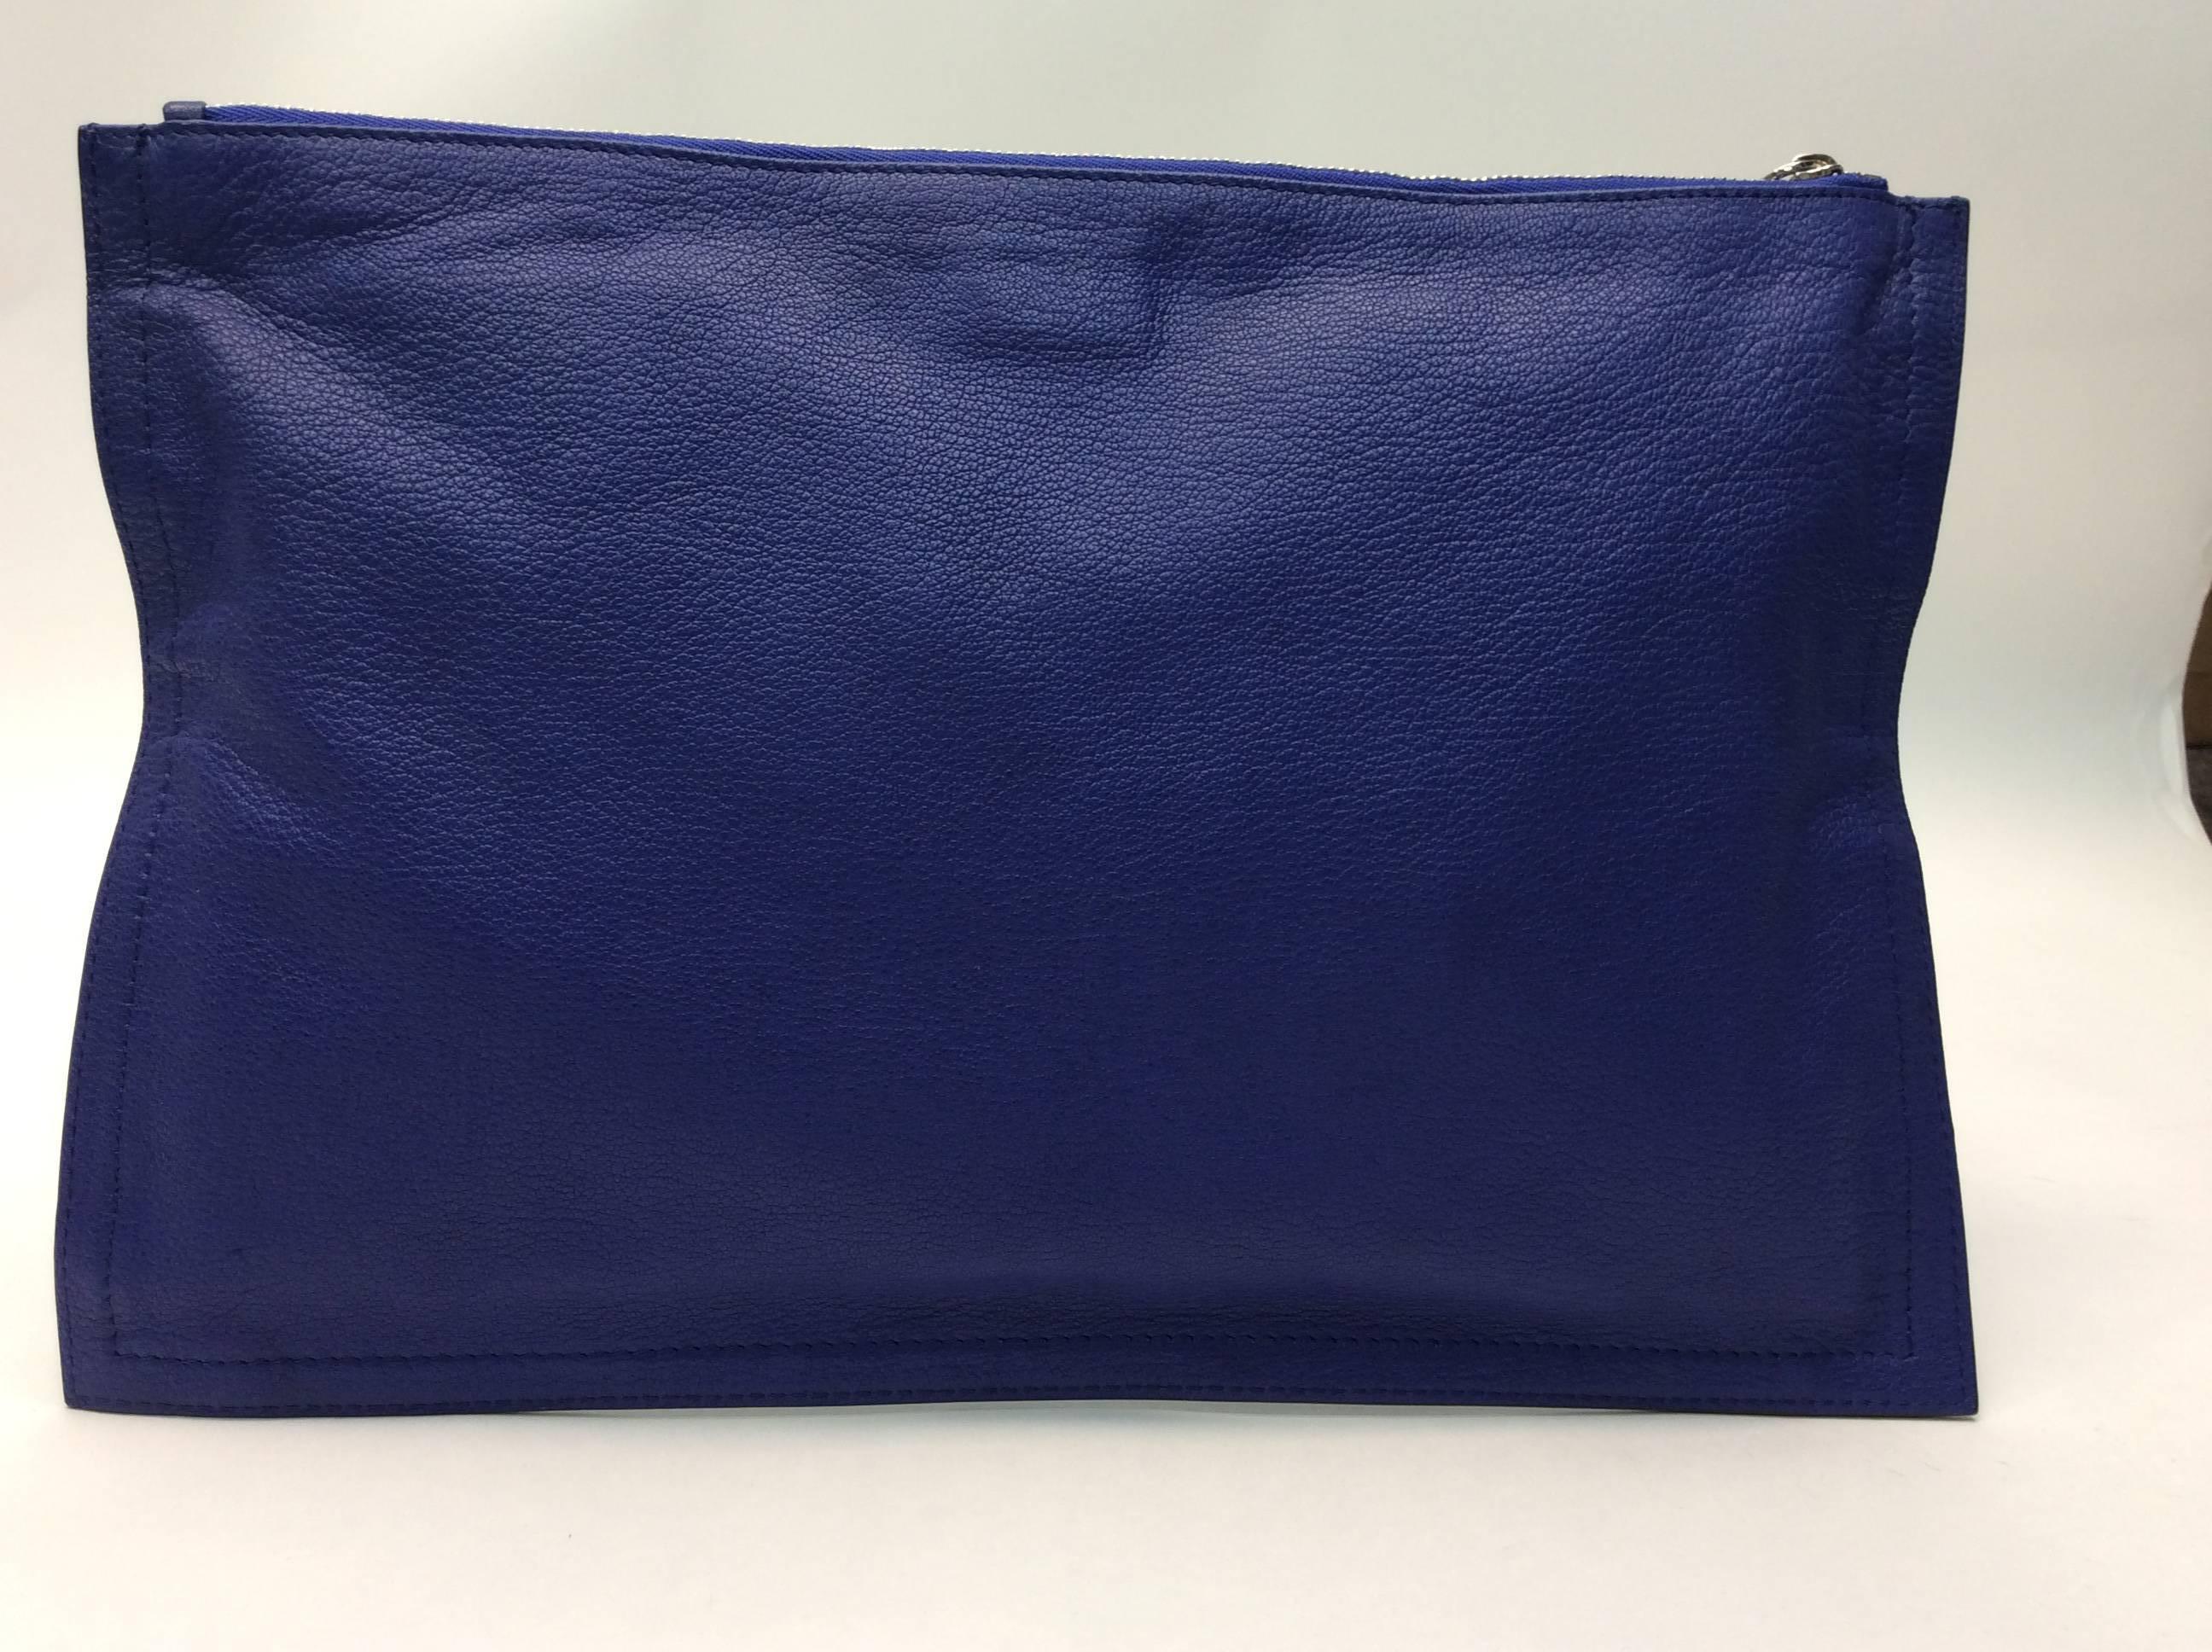 Givenchy Royal Blue Clutch  In Excellent Condition For Sale In Narberth, PA